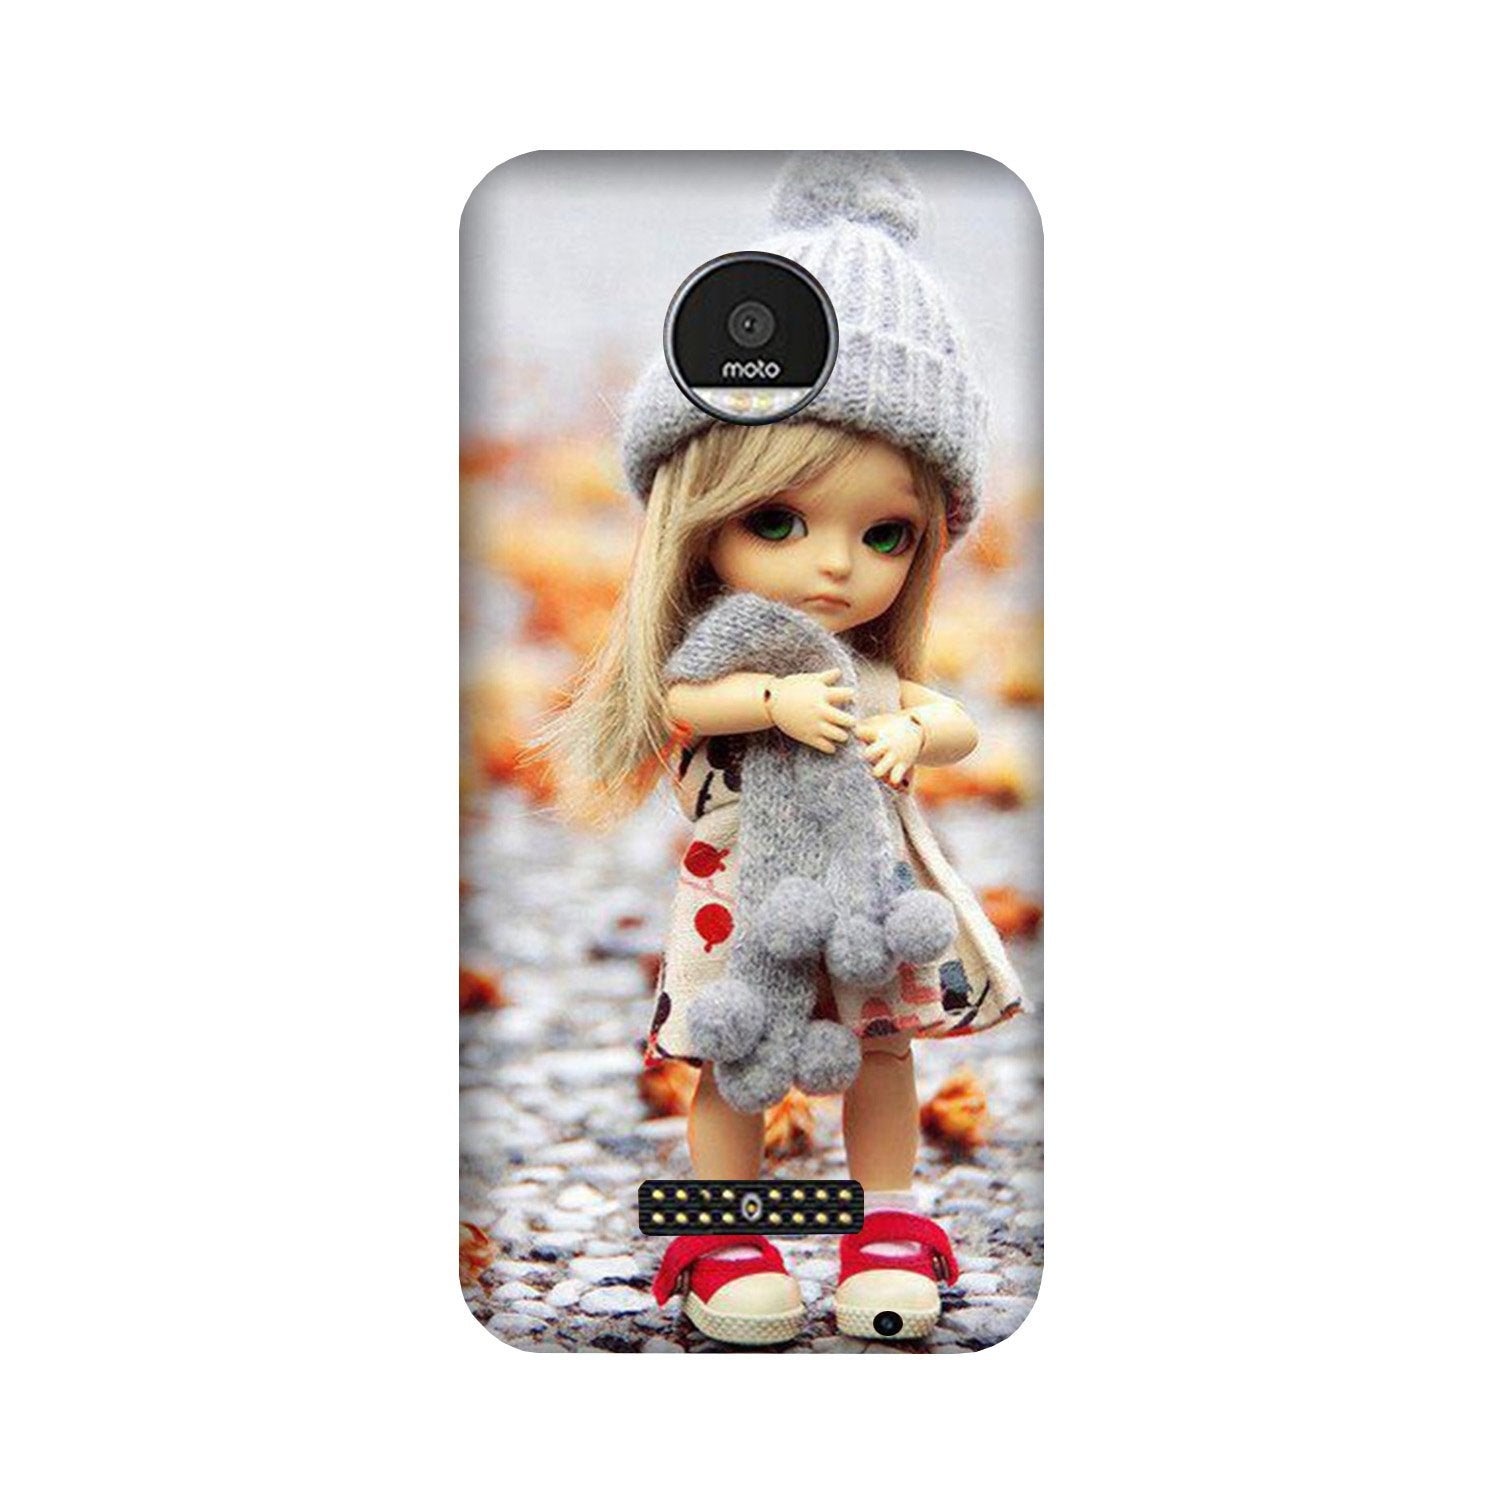 Cute Doll Case for Moto Z2 Play